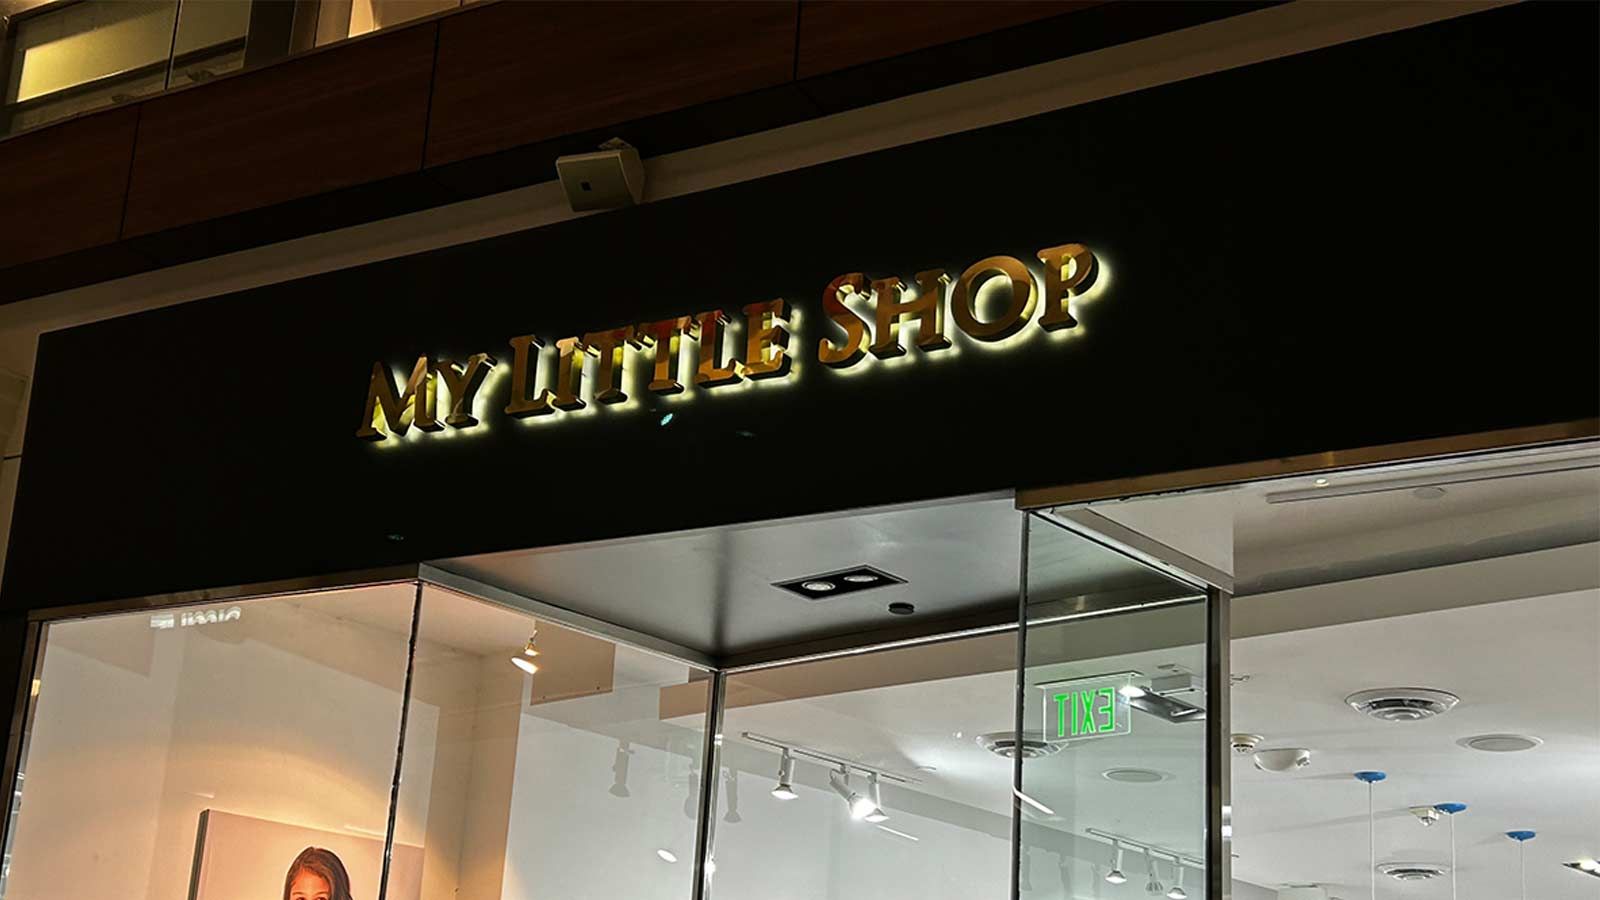 My Little Shop backlit letters mounted on the facade